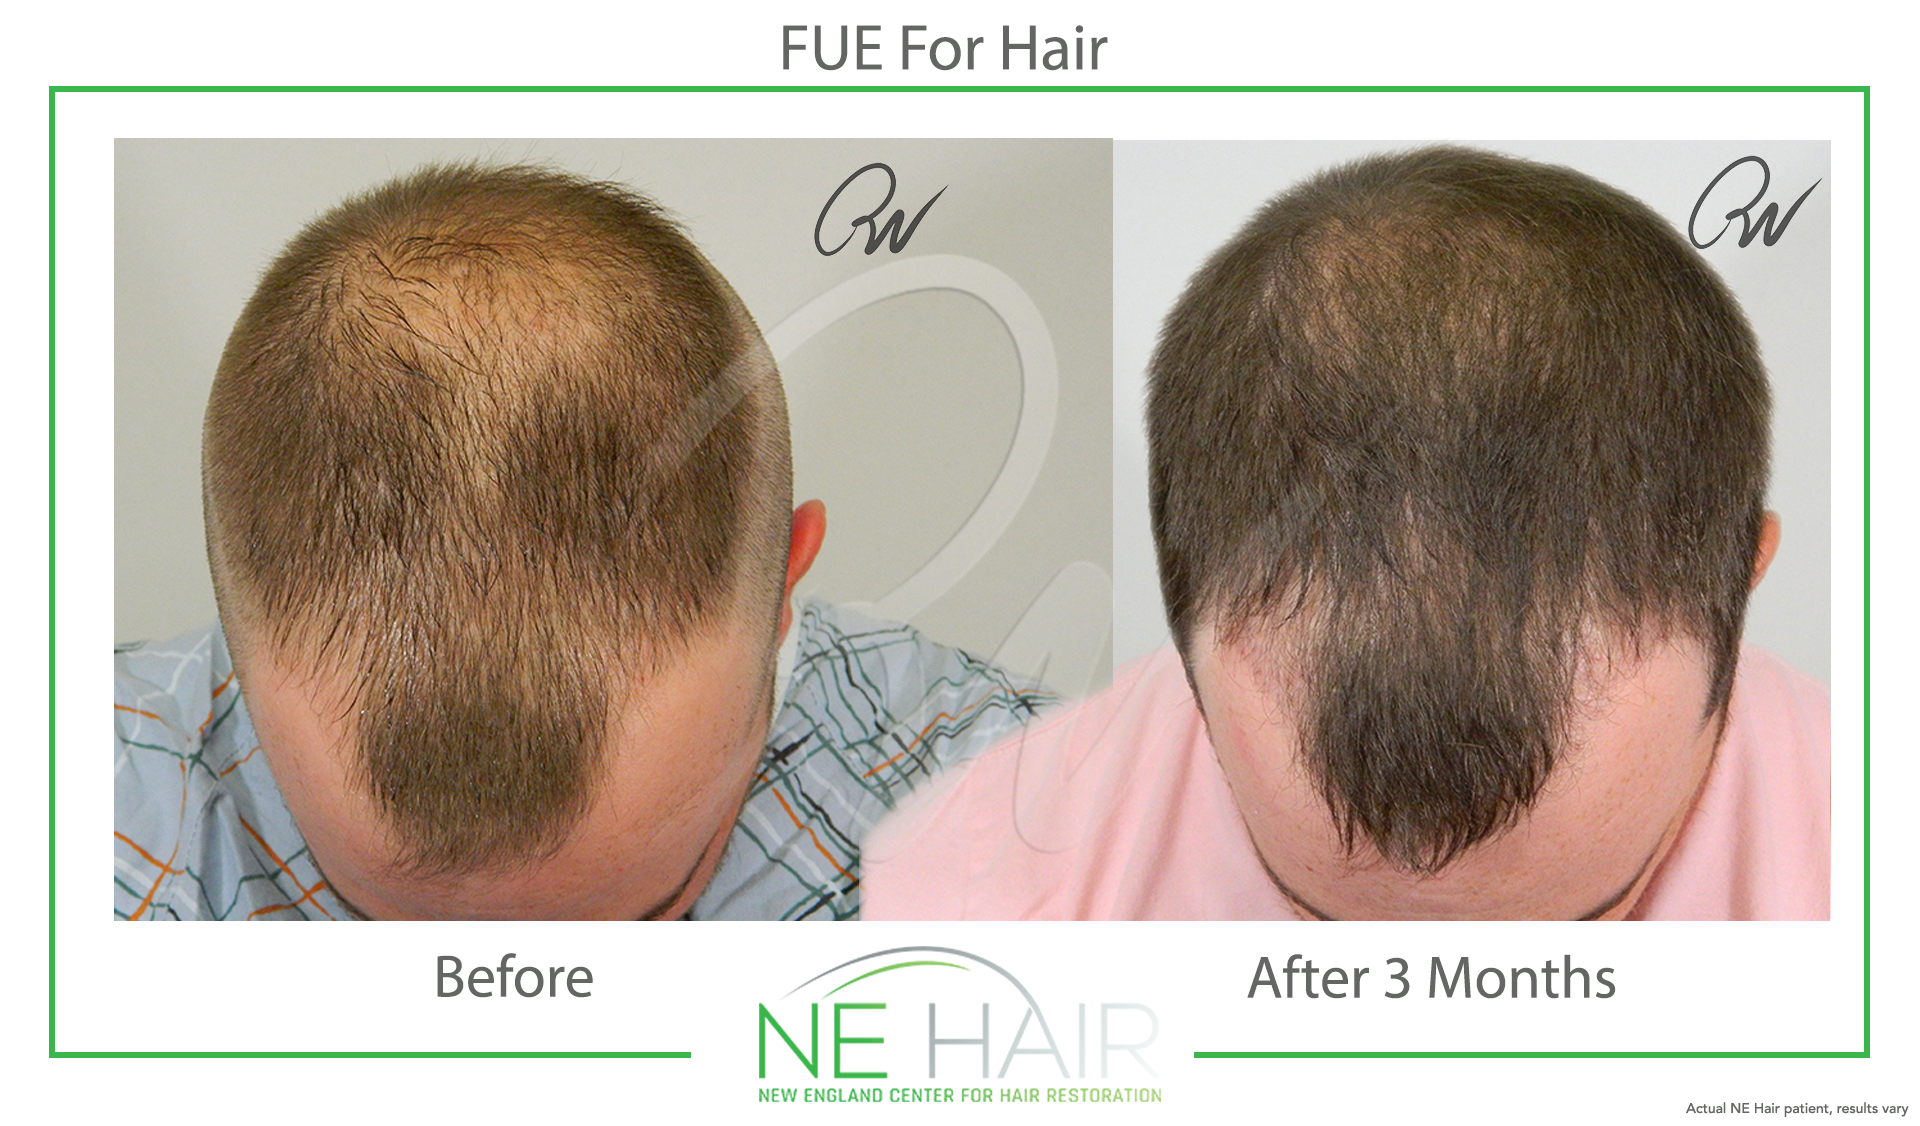 FUE 3 Months Male copy - New England Center for Hair Restoration